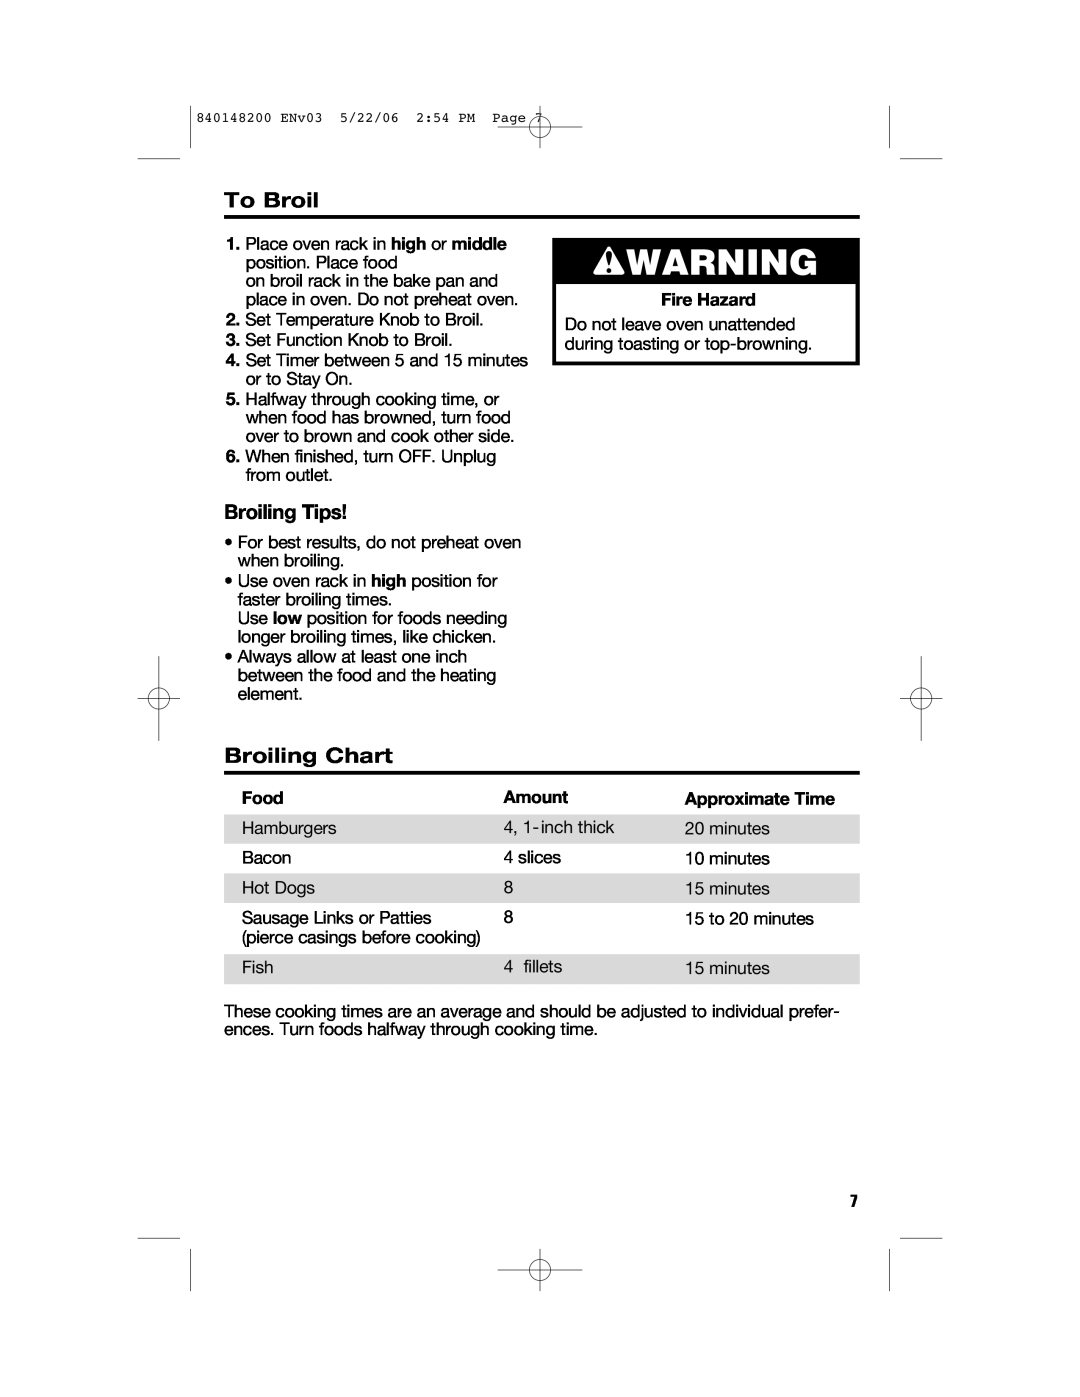 Hamilton Beach 31173, 31177 To Broil, Broiling Chart, Broiling Tips, Food, Amount, Approximate Time, wWARNING, Fire Hazard 